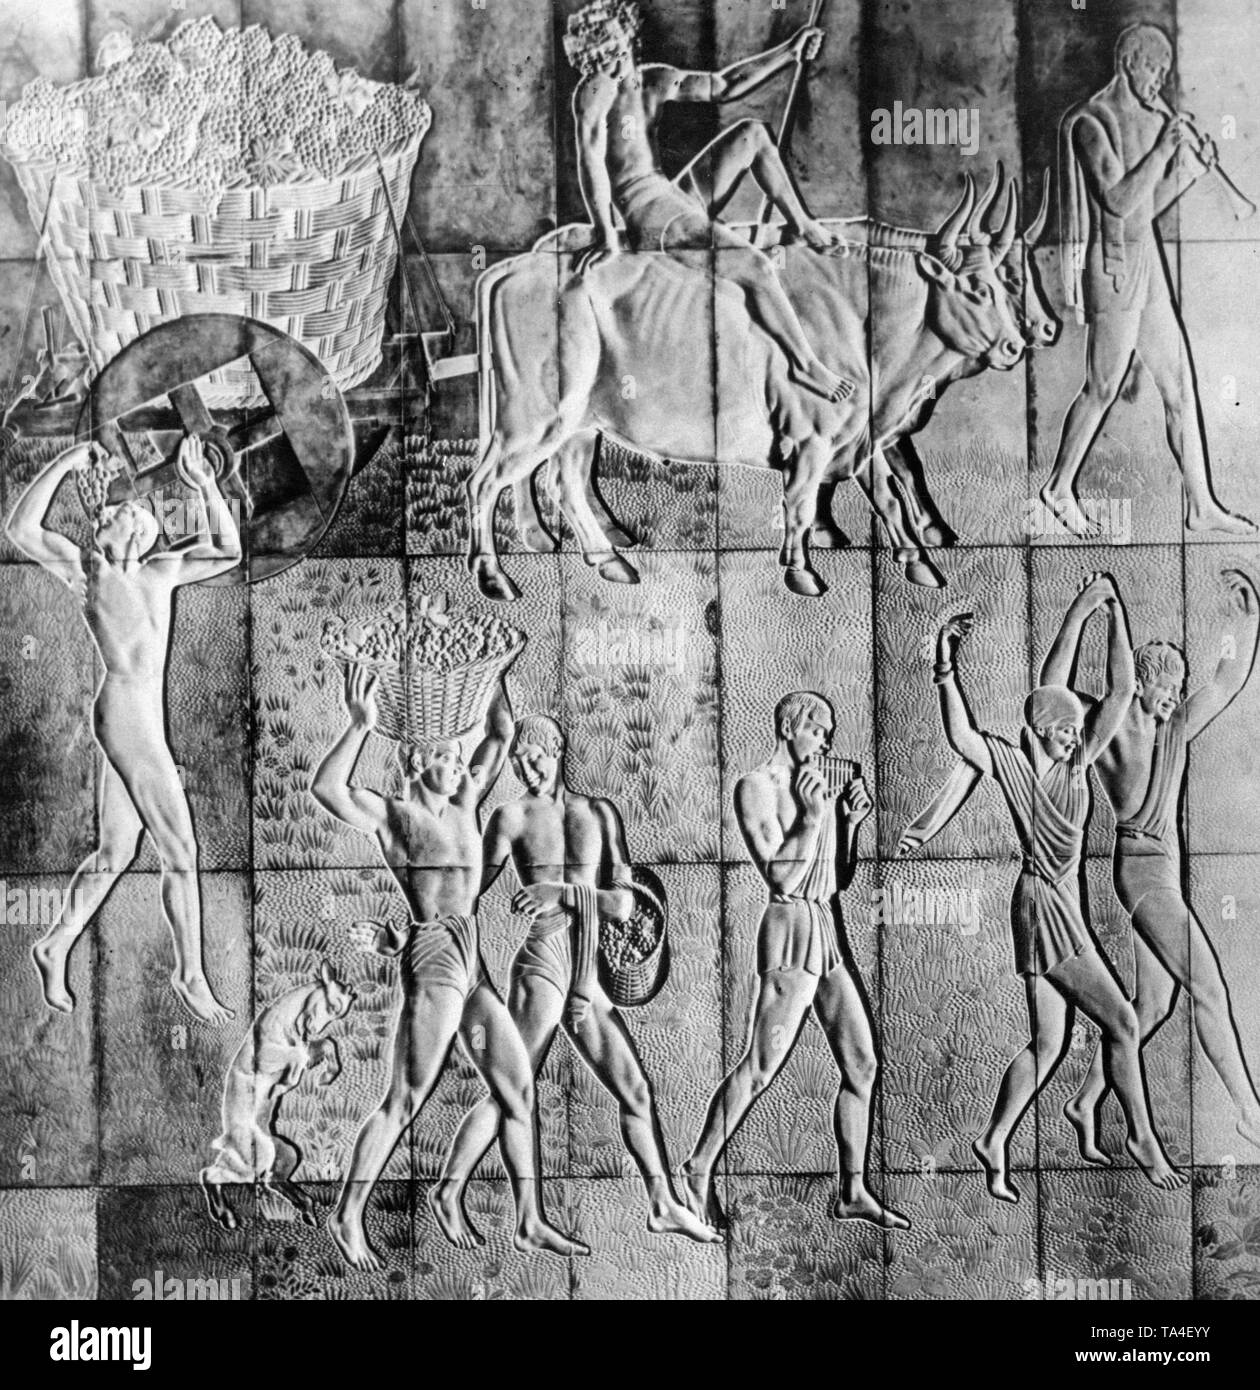 The relief 'Pecheurs Egyptiens' in the smoking room of the first class aboard the passenger ship 'Normandie'. Stock Photo